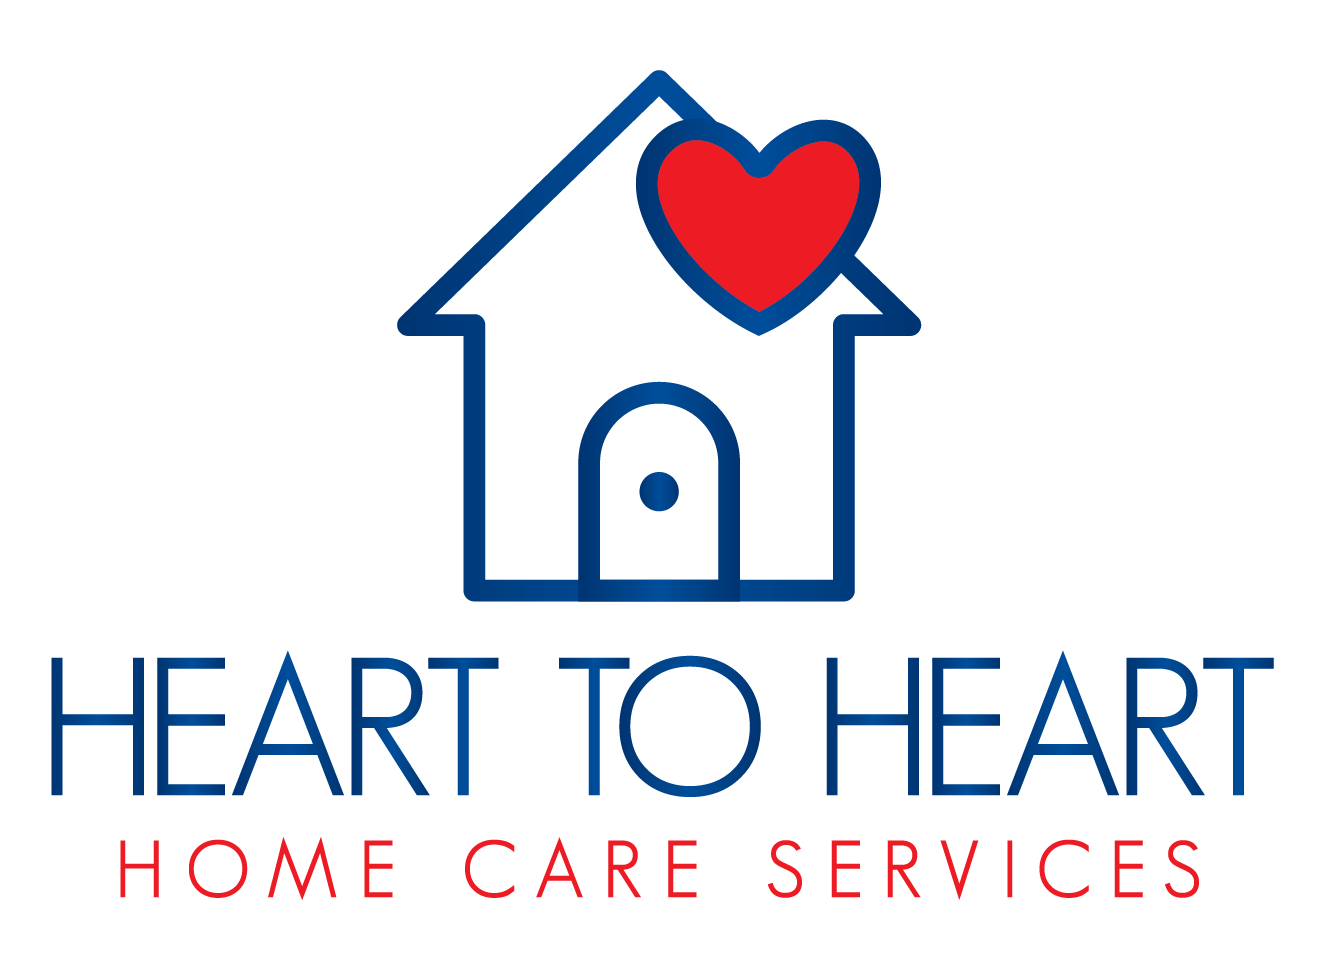 Contact us - Heart To Heart Home Care Services